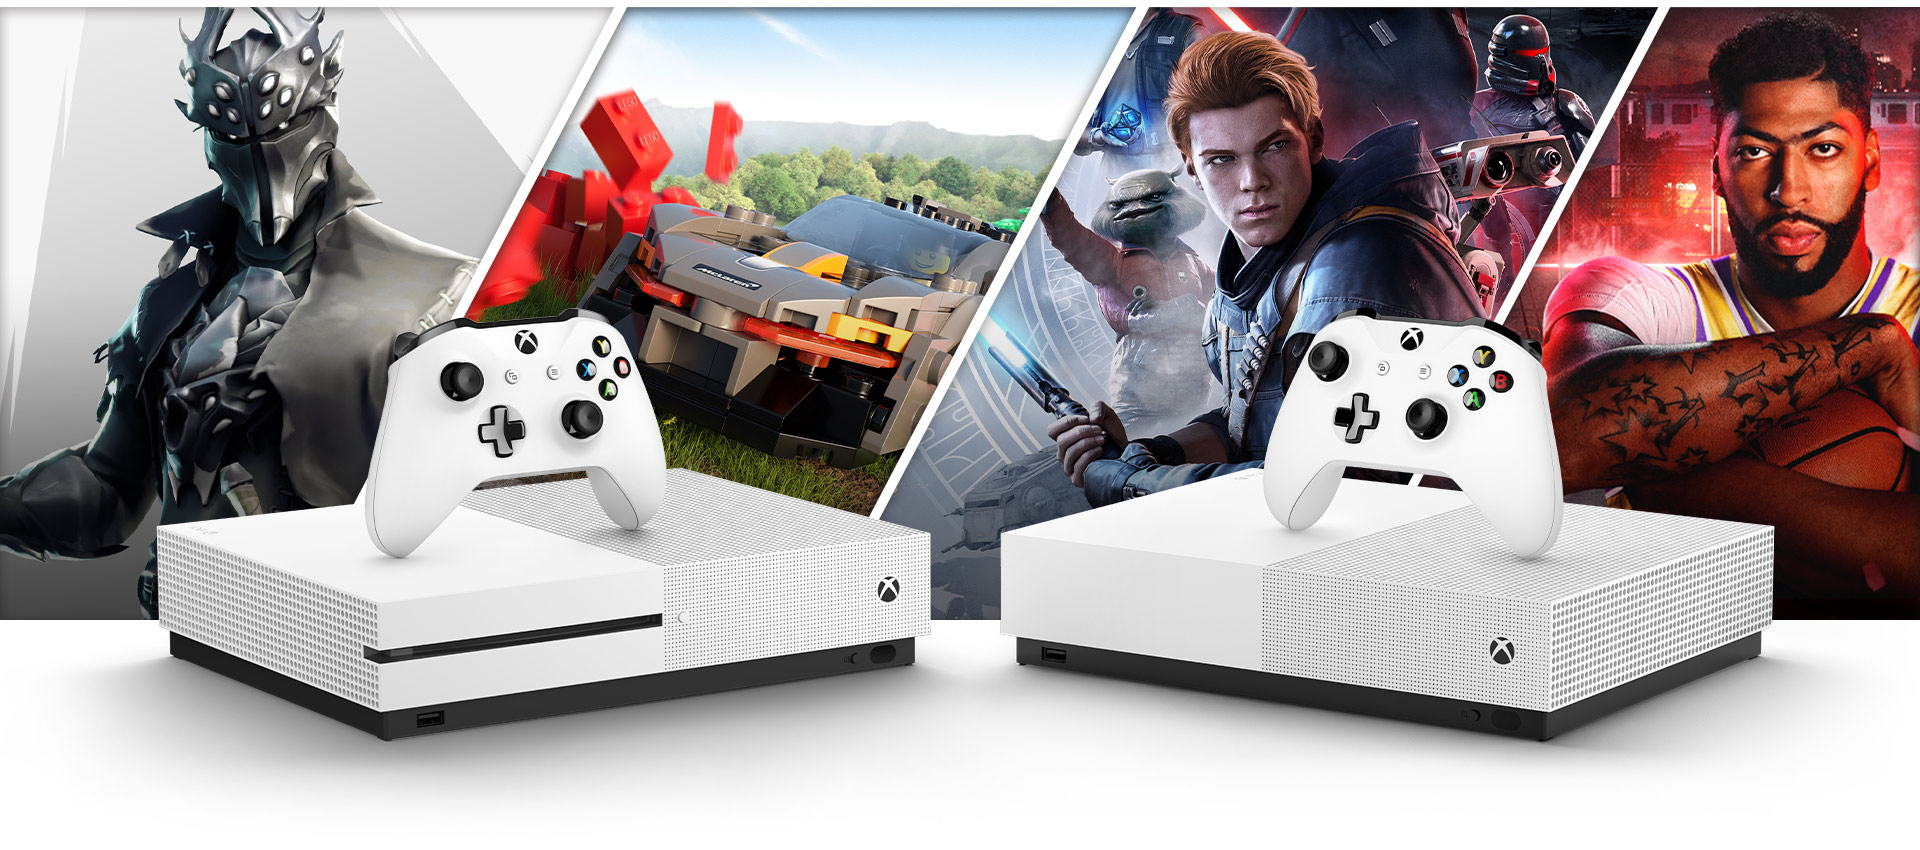 Fortnite, Forza Horizon 4, Star Wars Jedi Fallen Order and NBA 2K20 graphics behind an Xbox One S and Xbox One S All Digital Edition